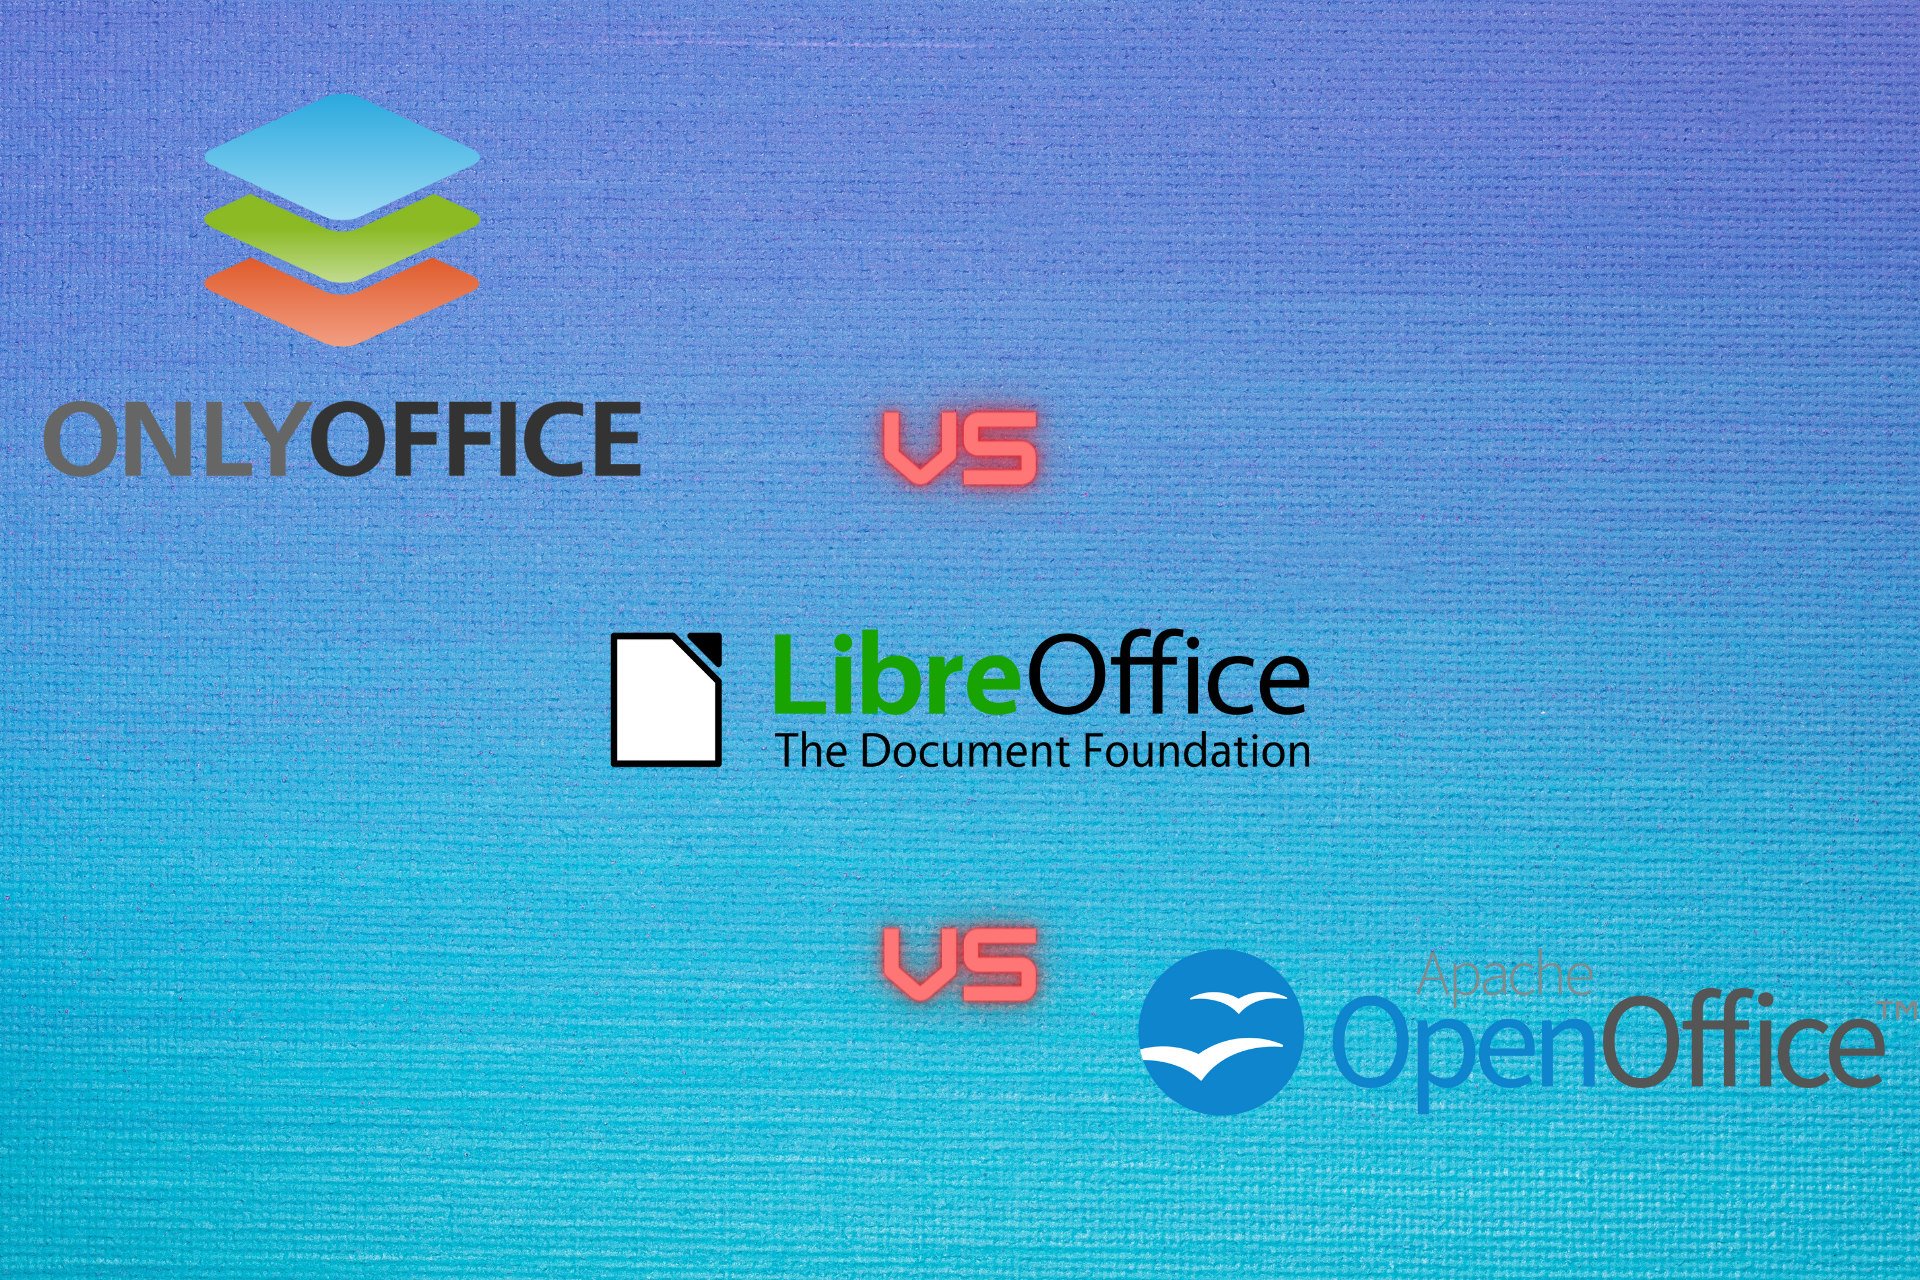 OnlyOffice vs LibreOffice vs OpenOffice which is better